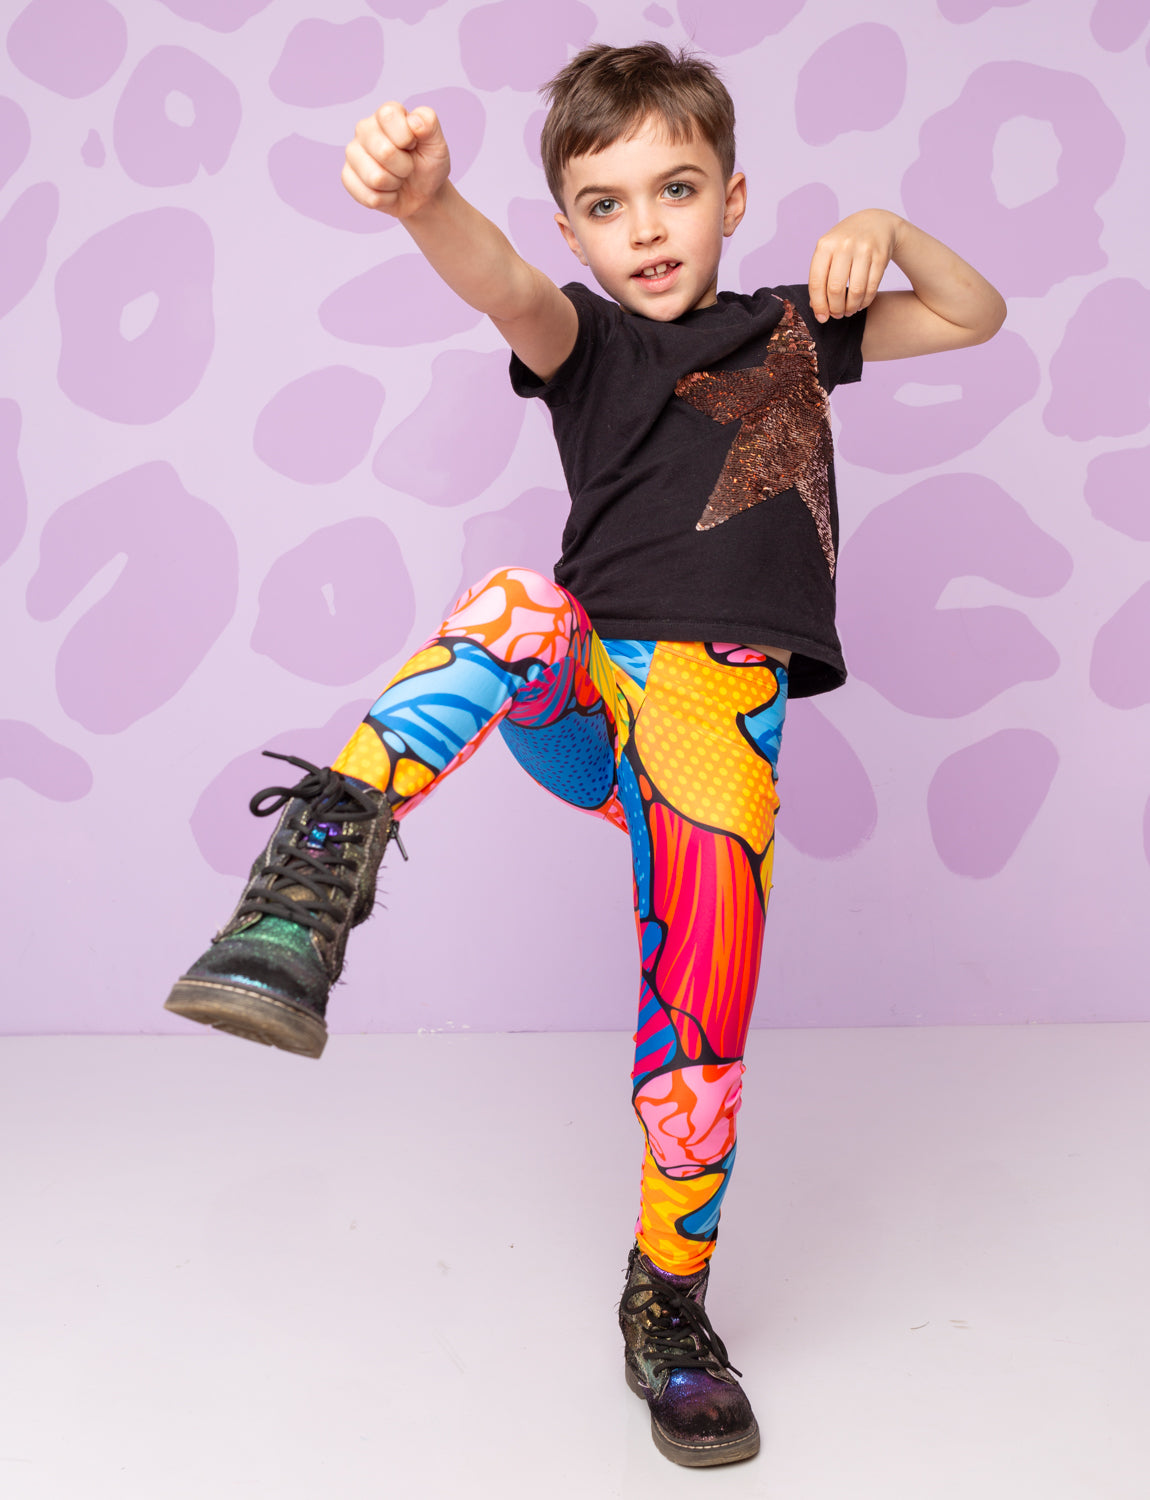 Boy kicking in the air wearing patterned leggings and star t-shirt